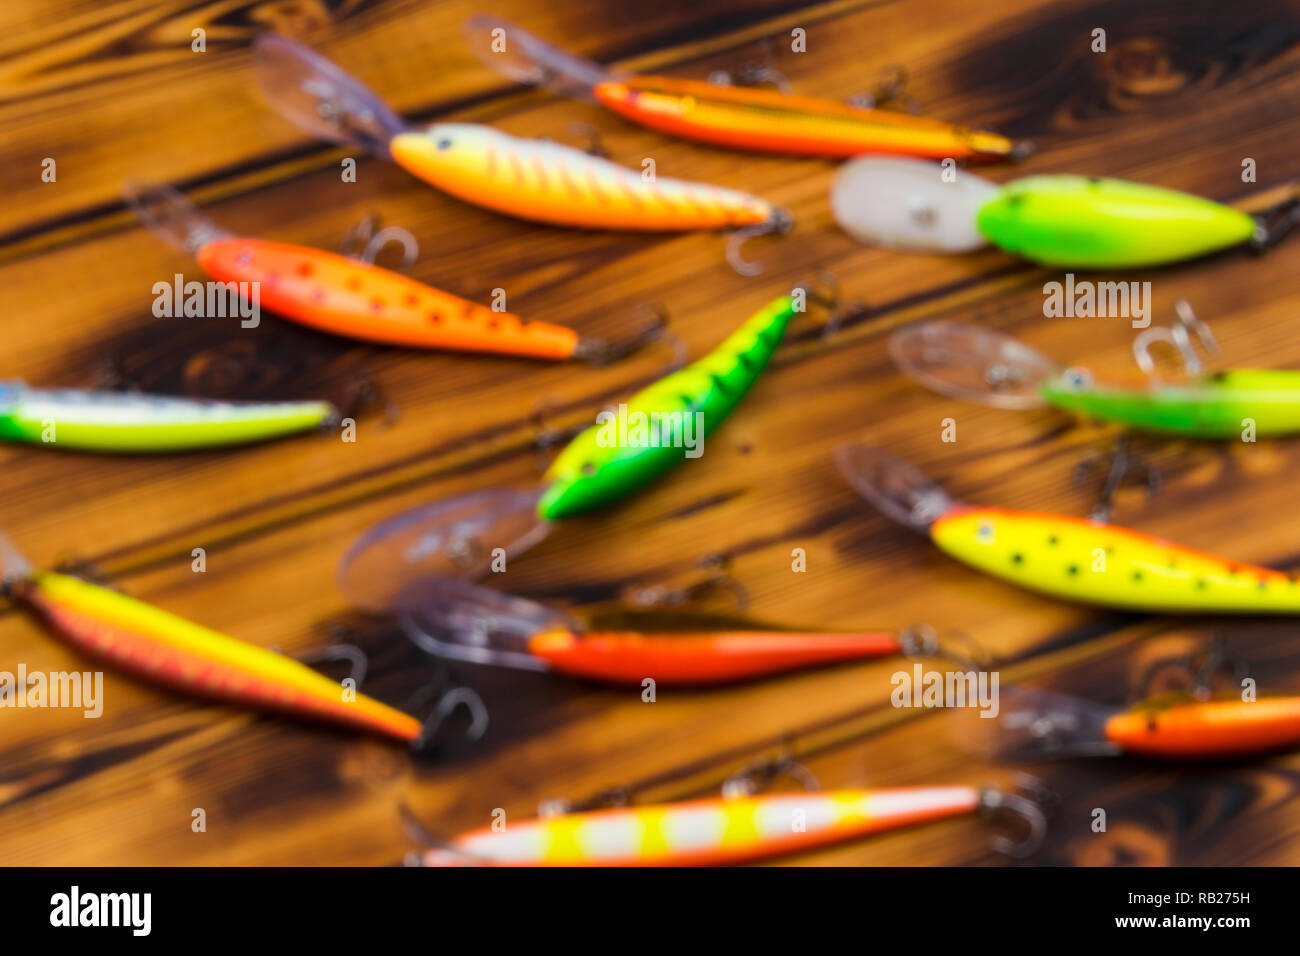 https://c8.alamy.com/comp/RB275H/blurred-background-on-the-fishing-theme-fishing-gear-fishing-tackle-RB275H.jpg